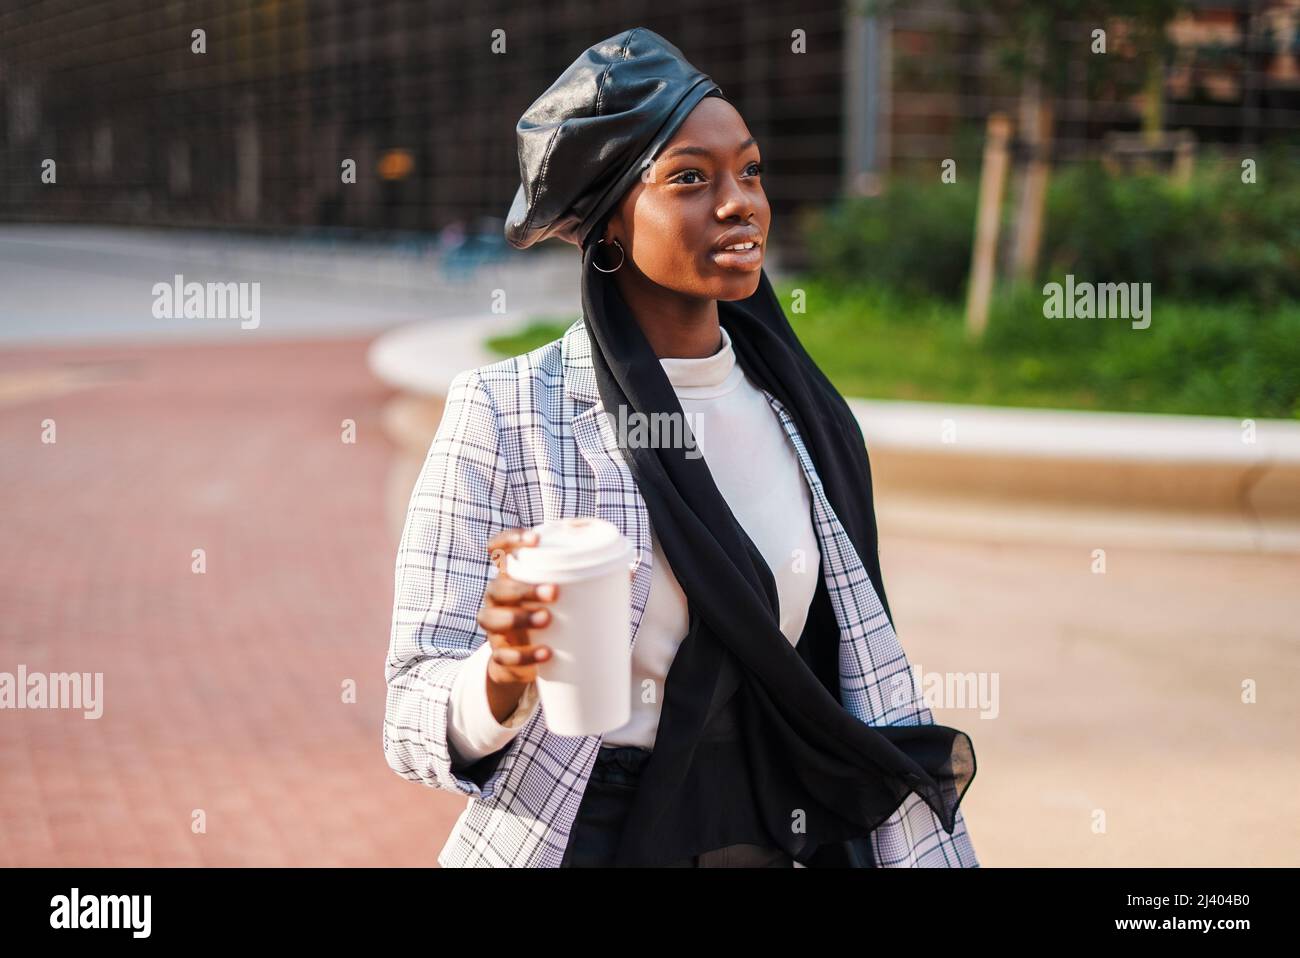 Serious young African American lady in trendy outfit with leather beret on Muslim headscarf having takeaway beverage and looking away with attentive gaze in park Stock Photo